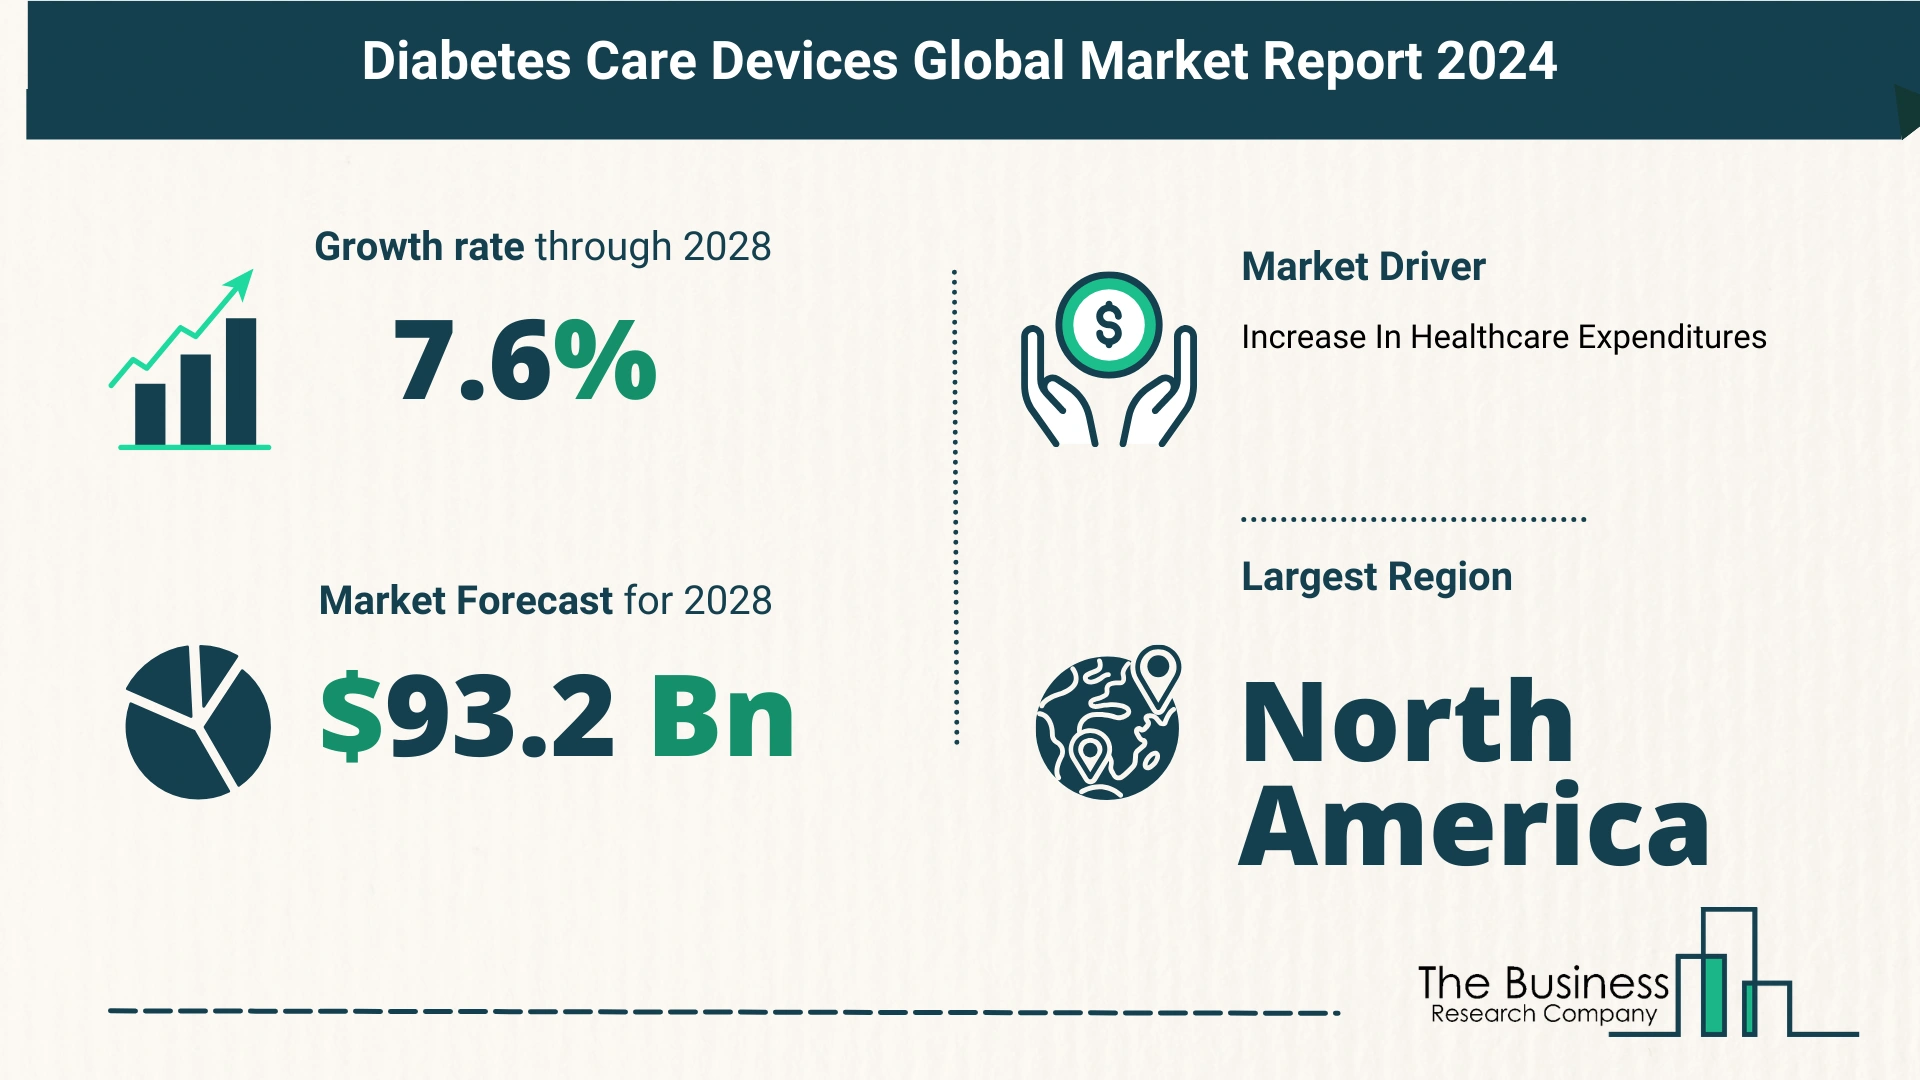 Top 5 Insights From The Diabetes Care Devices Market Report 2024